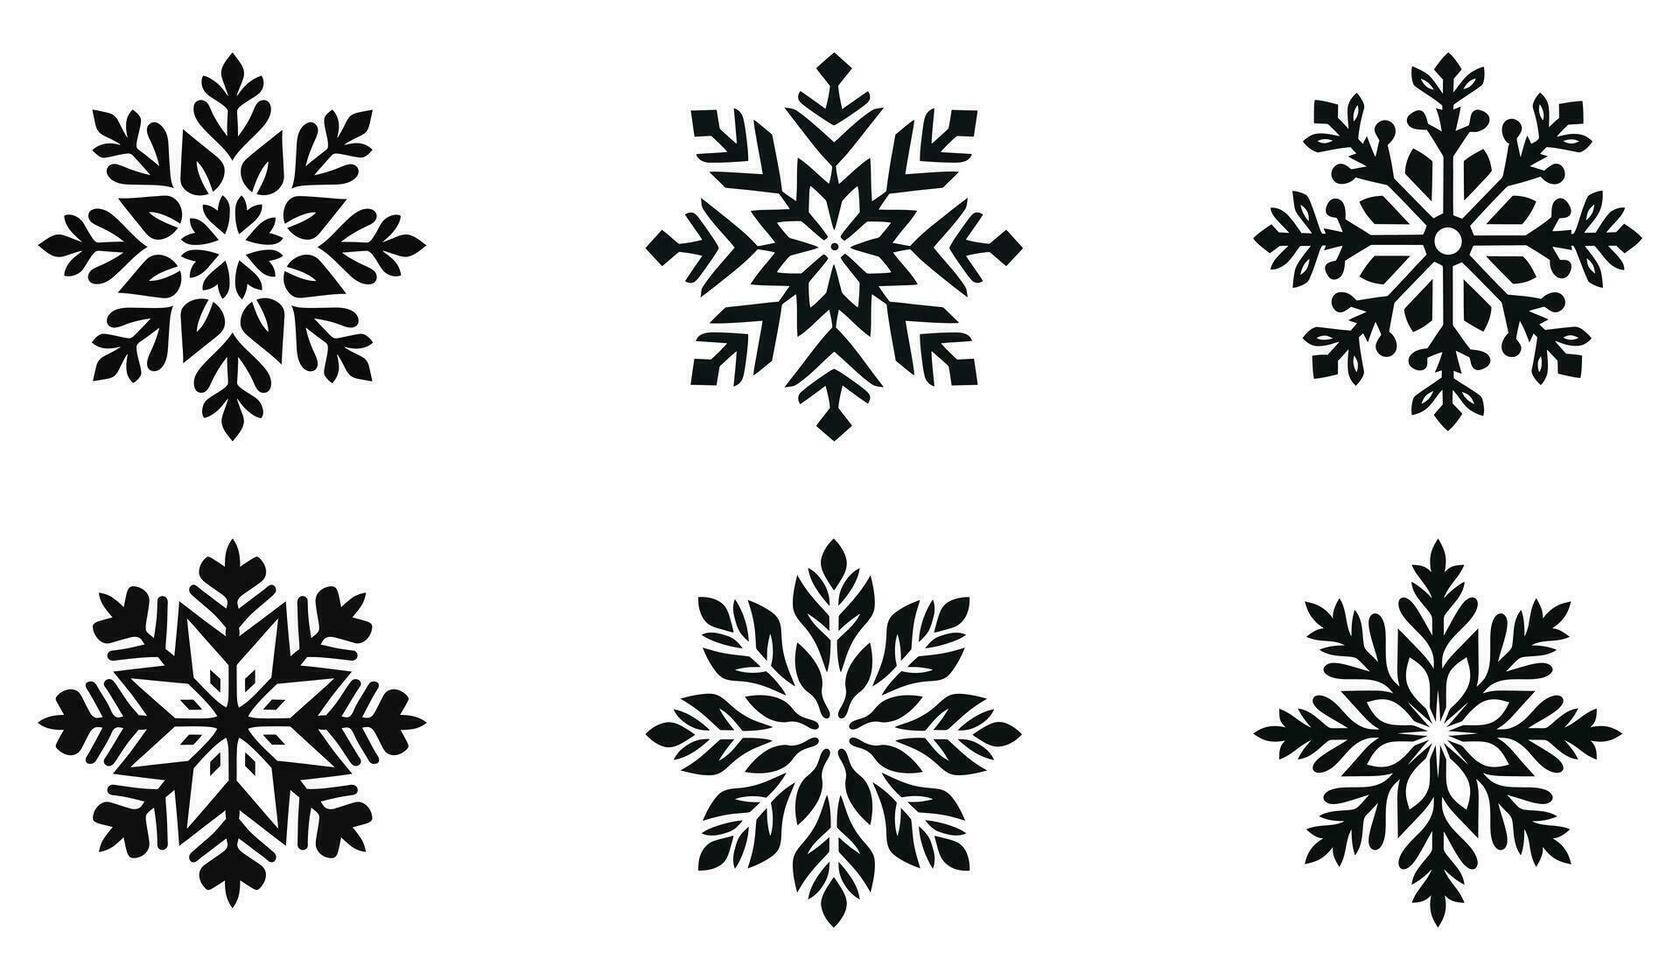 Frozen Whirlwind Silhouette Collection vector